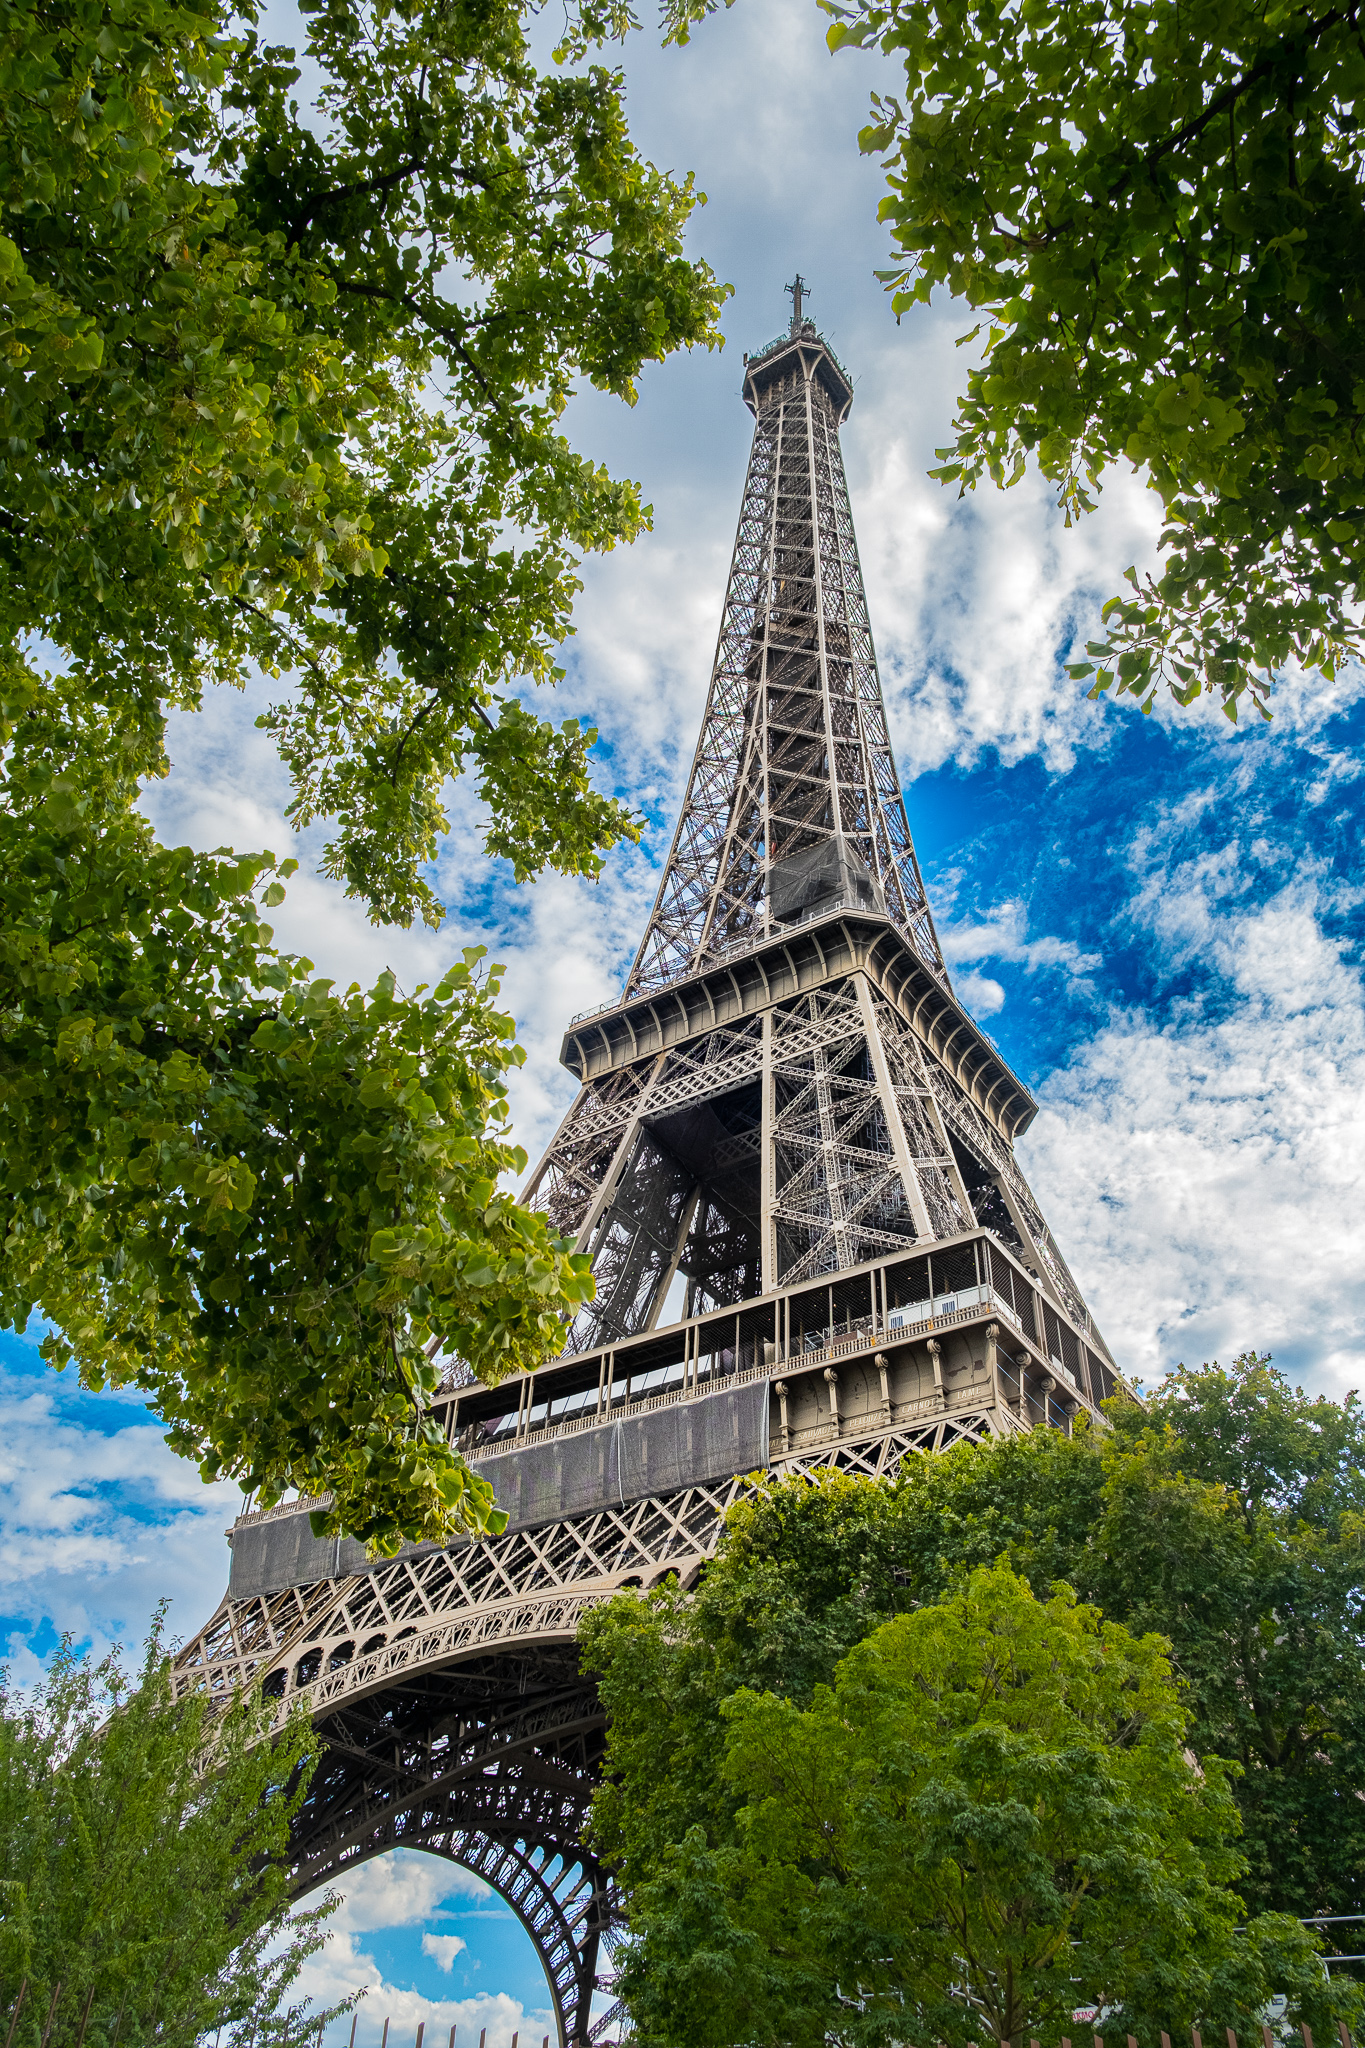 picture of an eifell tower from the bottom, with trees